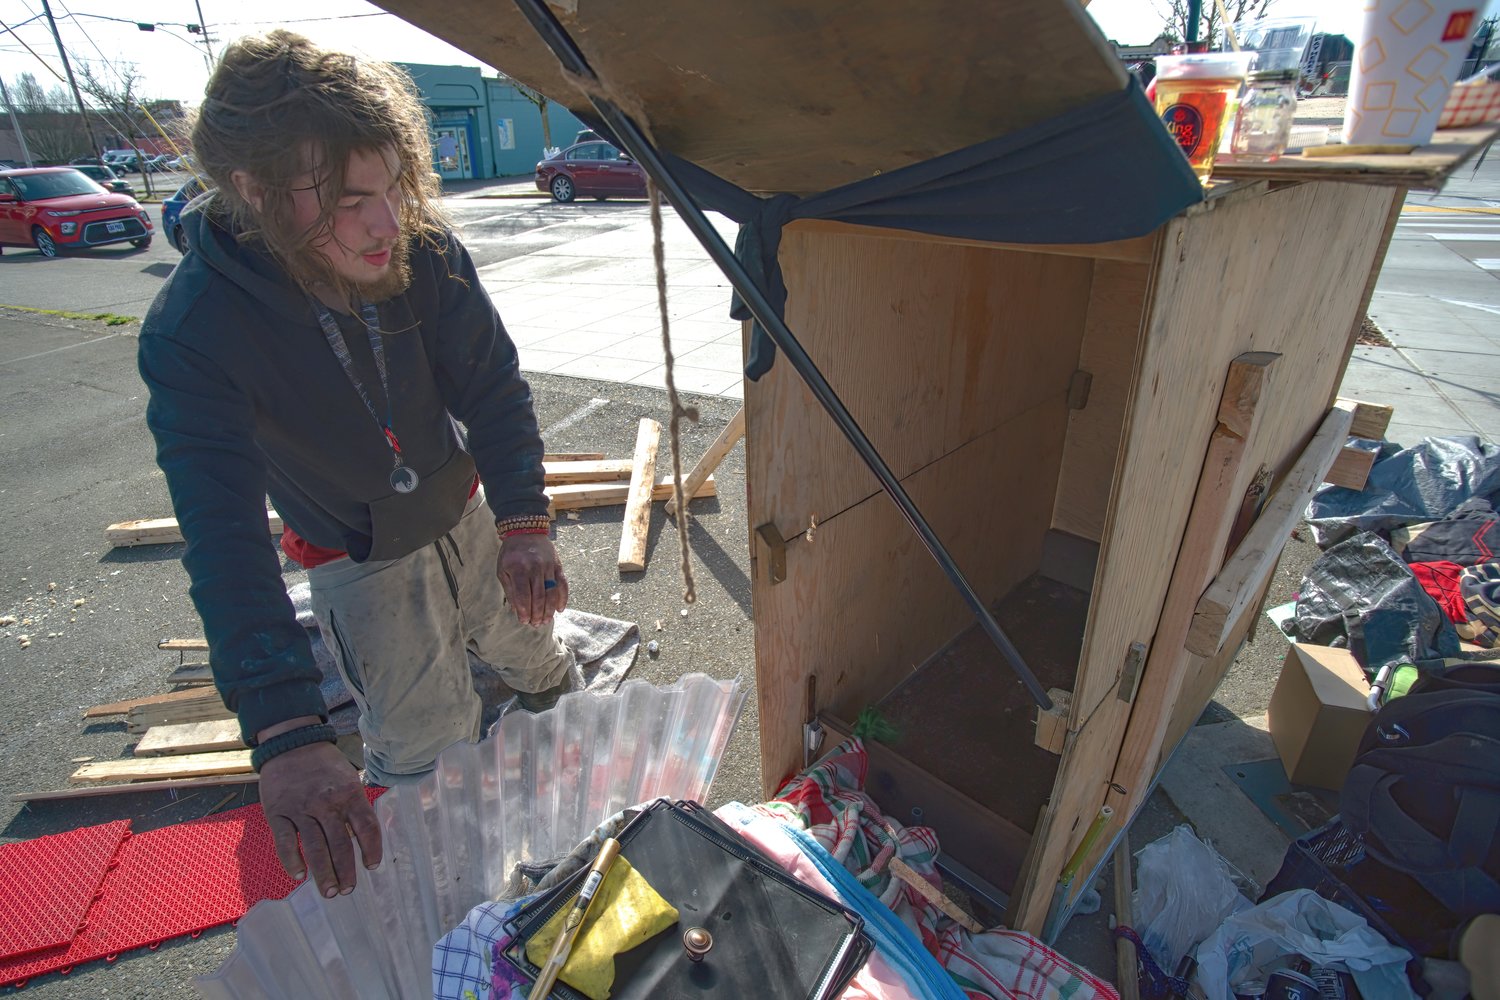 Danny's Condo: homeless person in downtown Olympia explained how he lives in his “mobile condo.”